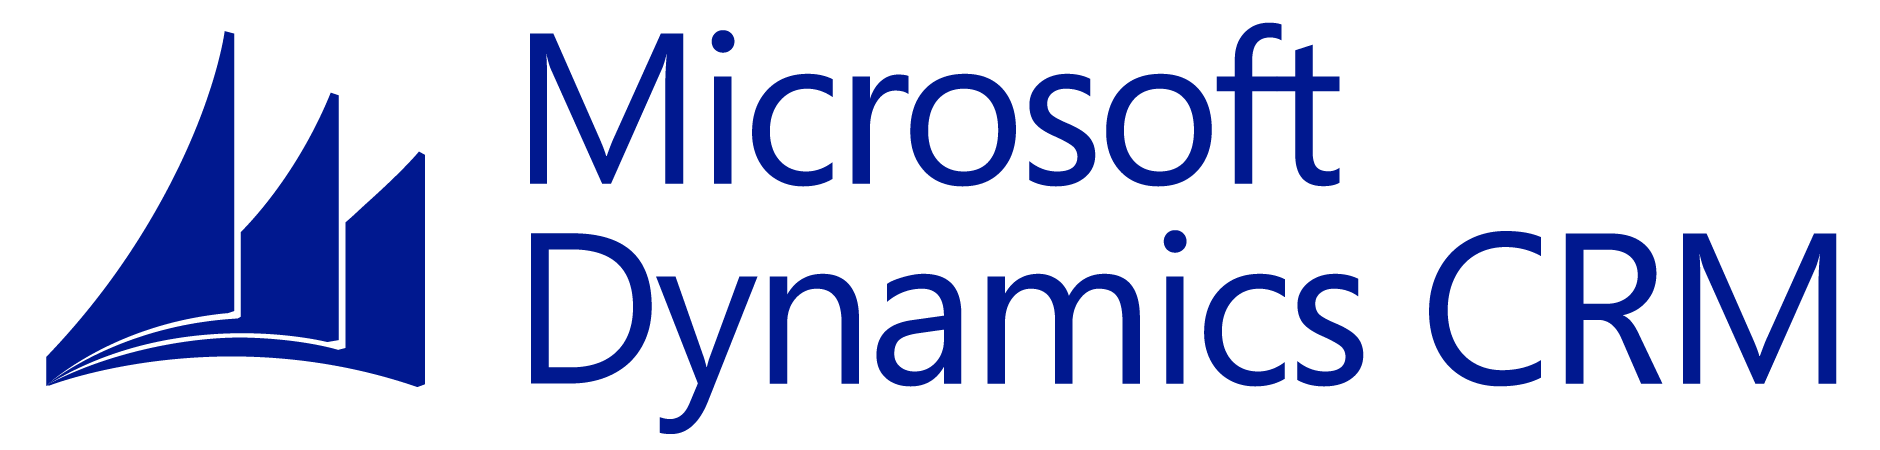 Microsoft CRM Logo - Personalize Business With Microsoft Dynamics CRM Queue Logo Image ...